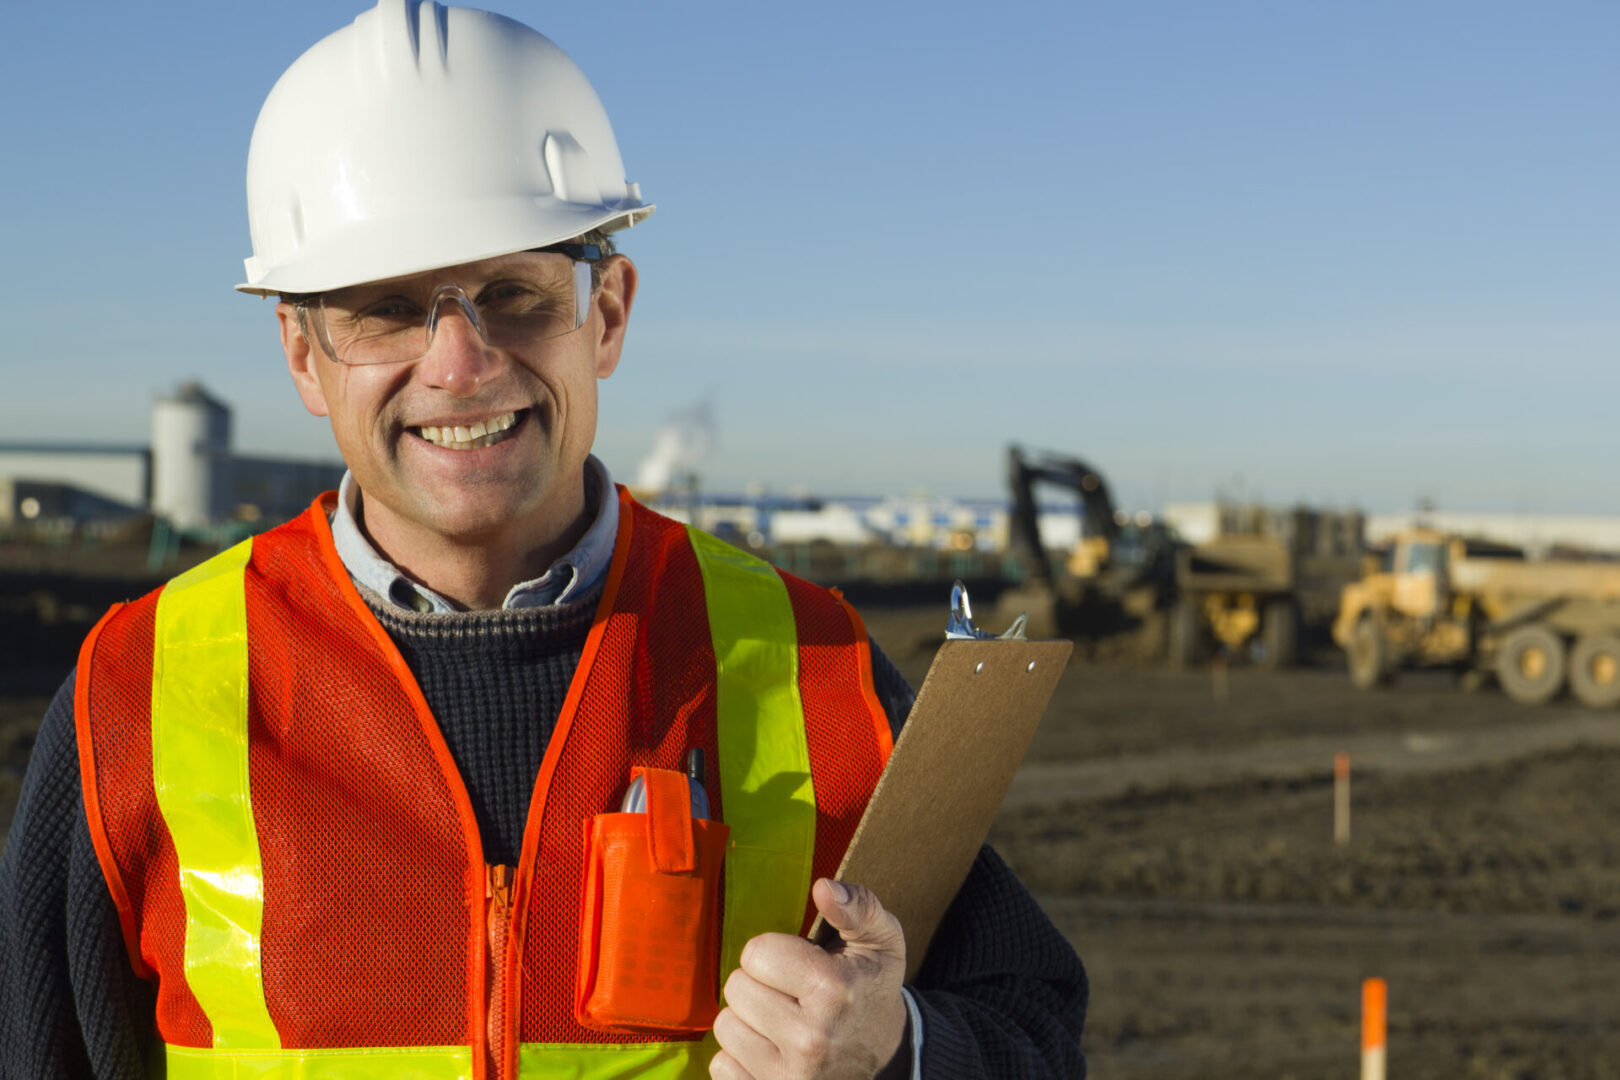 A royalty free image from the construction industry depicting an architect standing at a construction site.